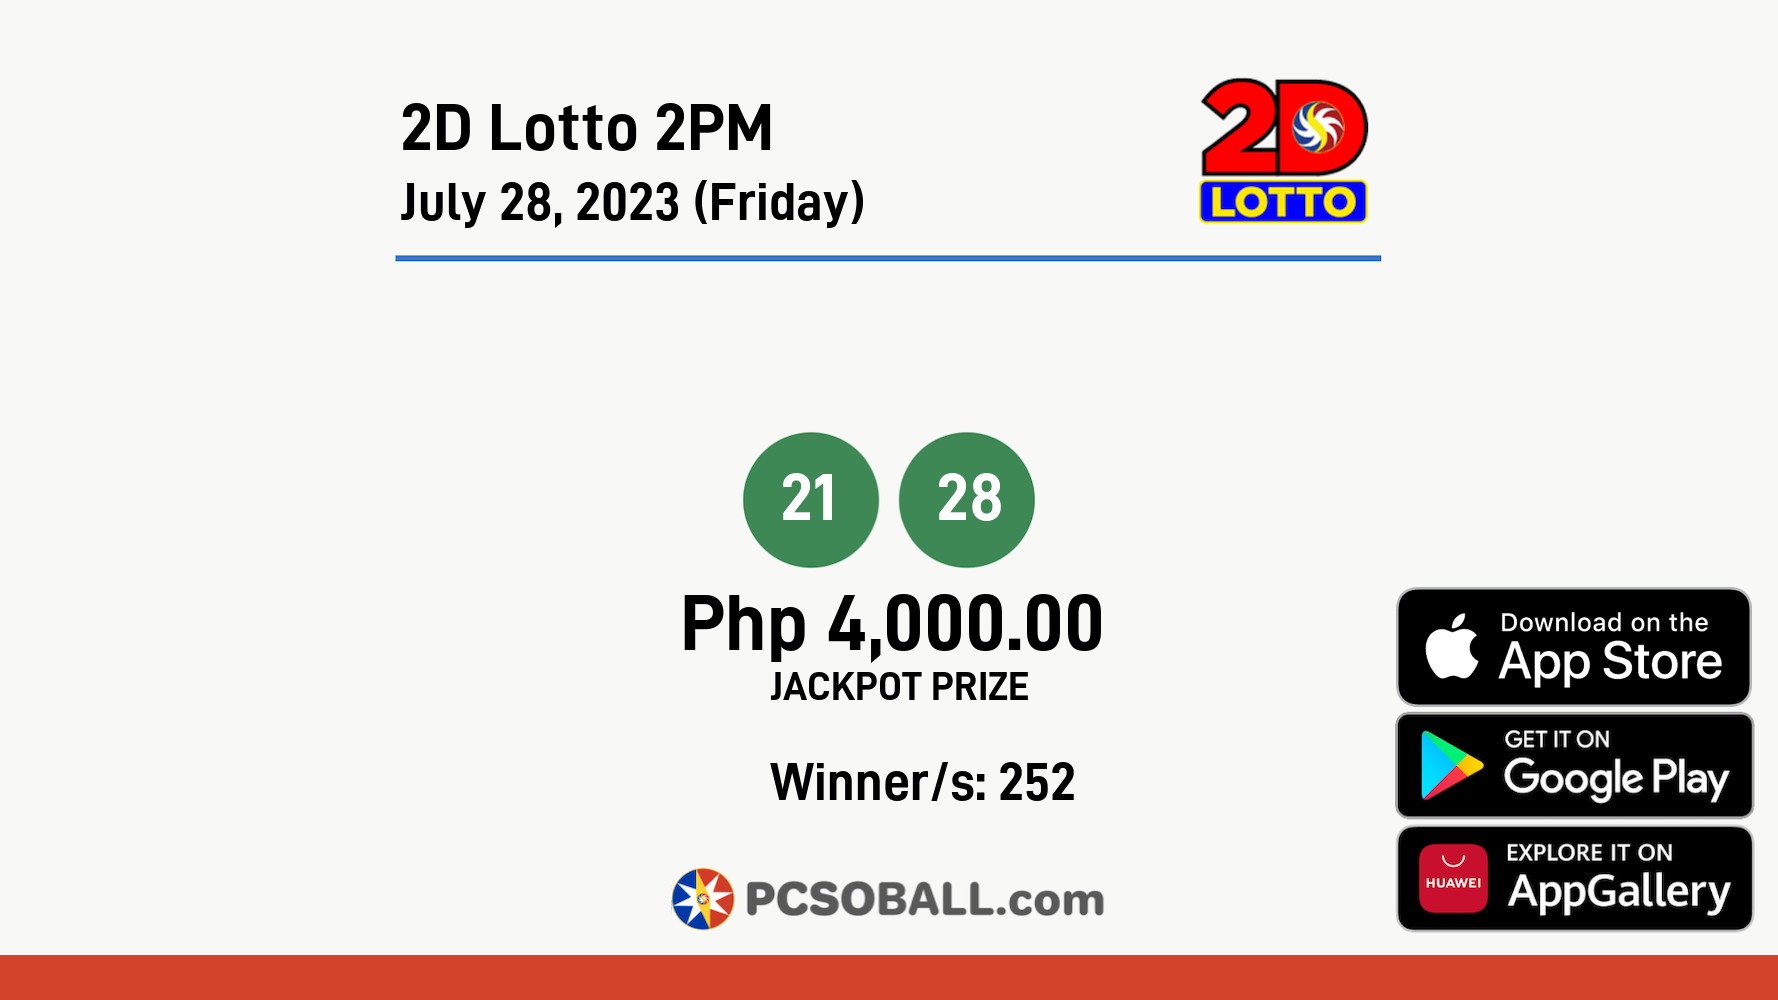 2D Lotto 2PM July 28, 2023 (Friday) Result